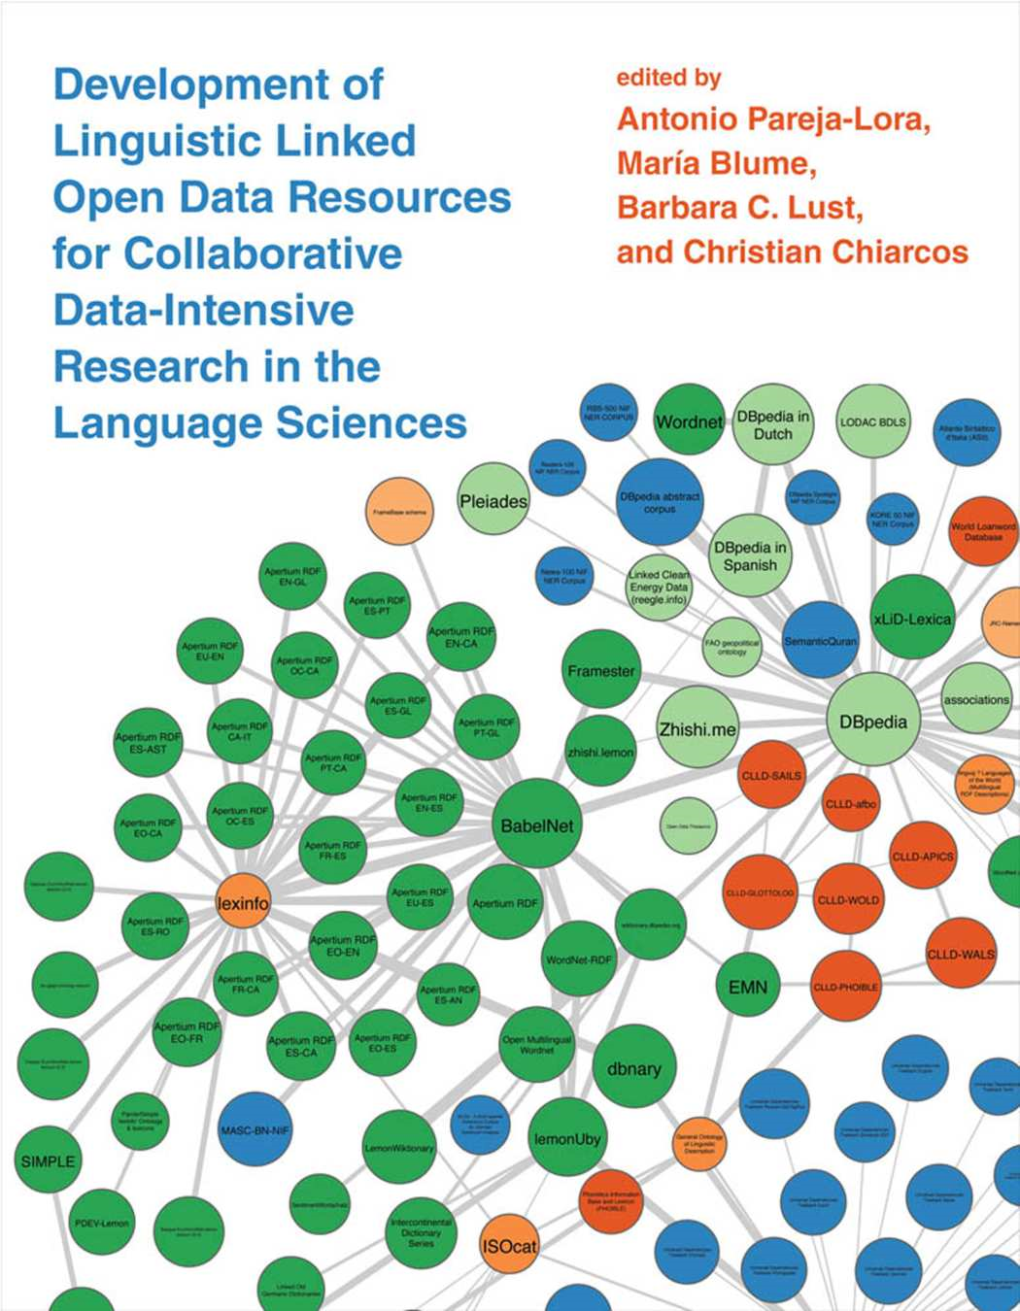 Development of Linguistic Linked Open Data Resources for Collaborative Data- Intensive Research in the Language Sciences